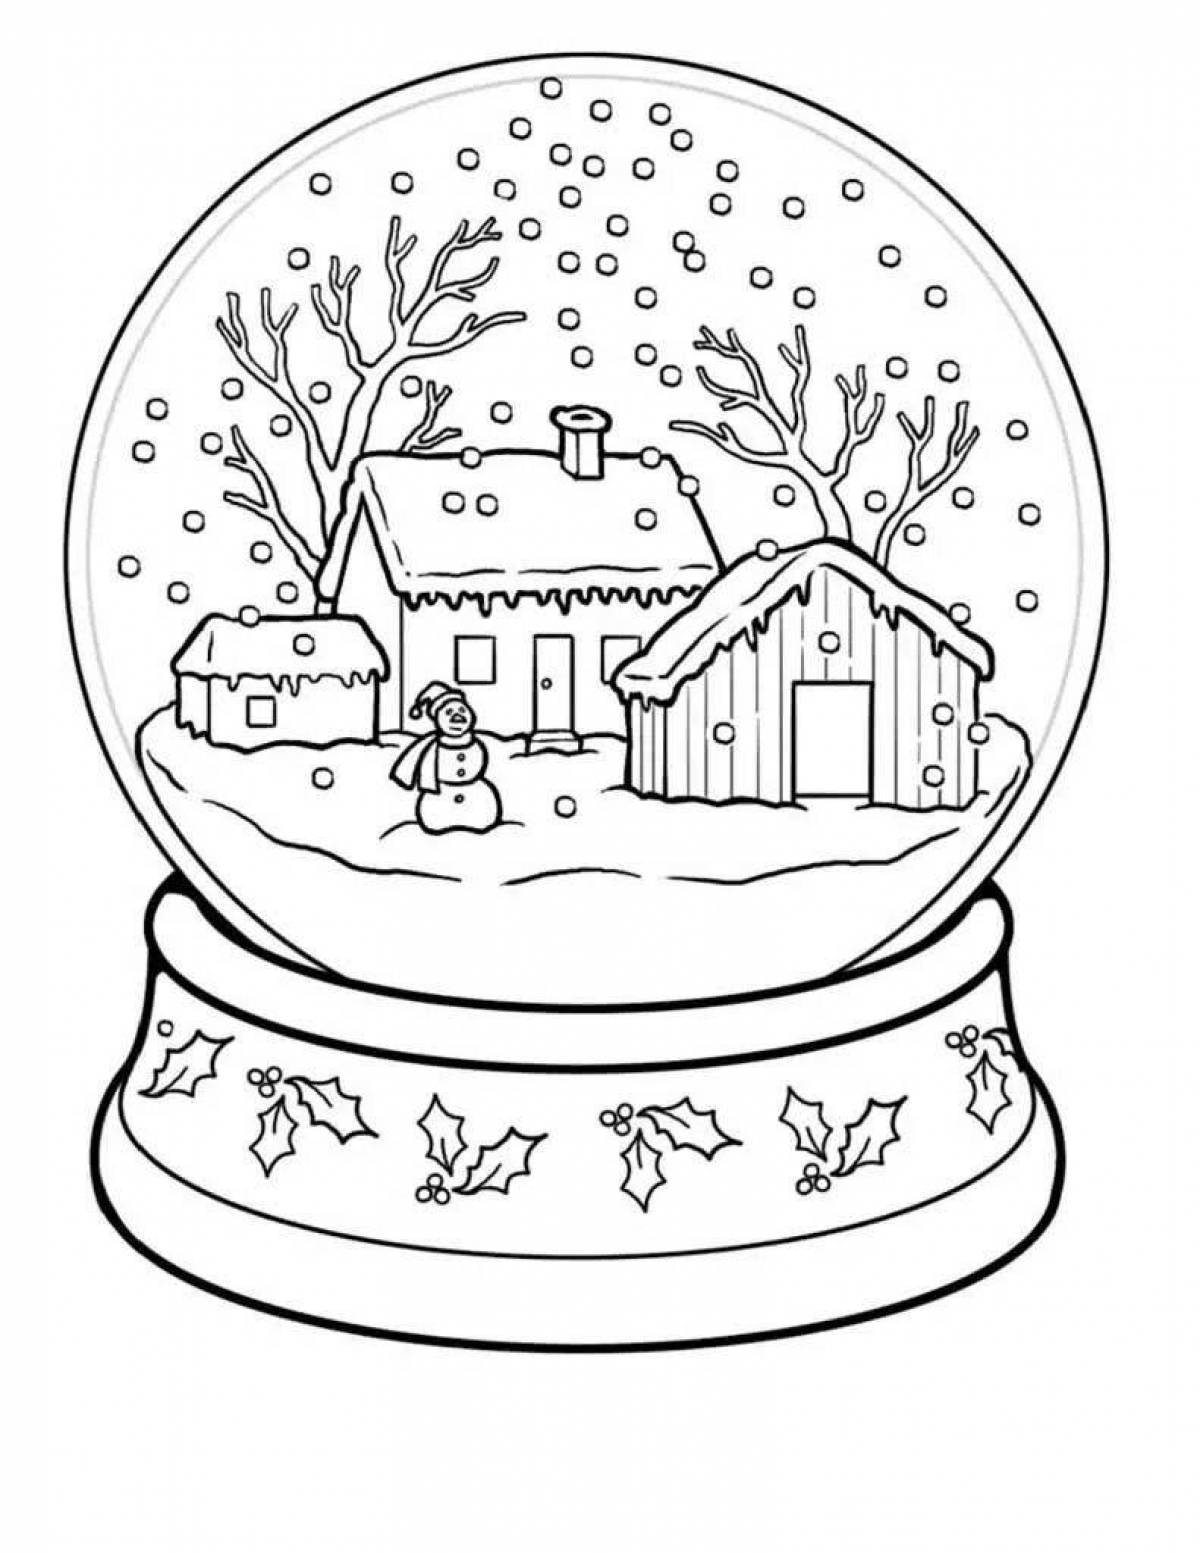 Live Christmas coloring book